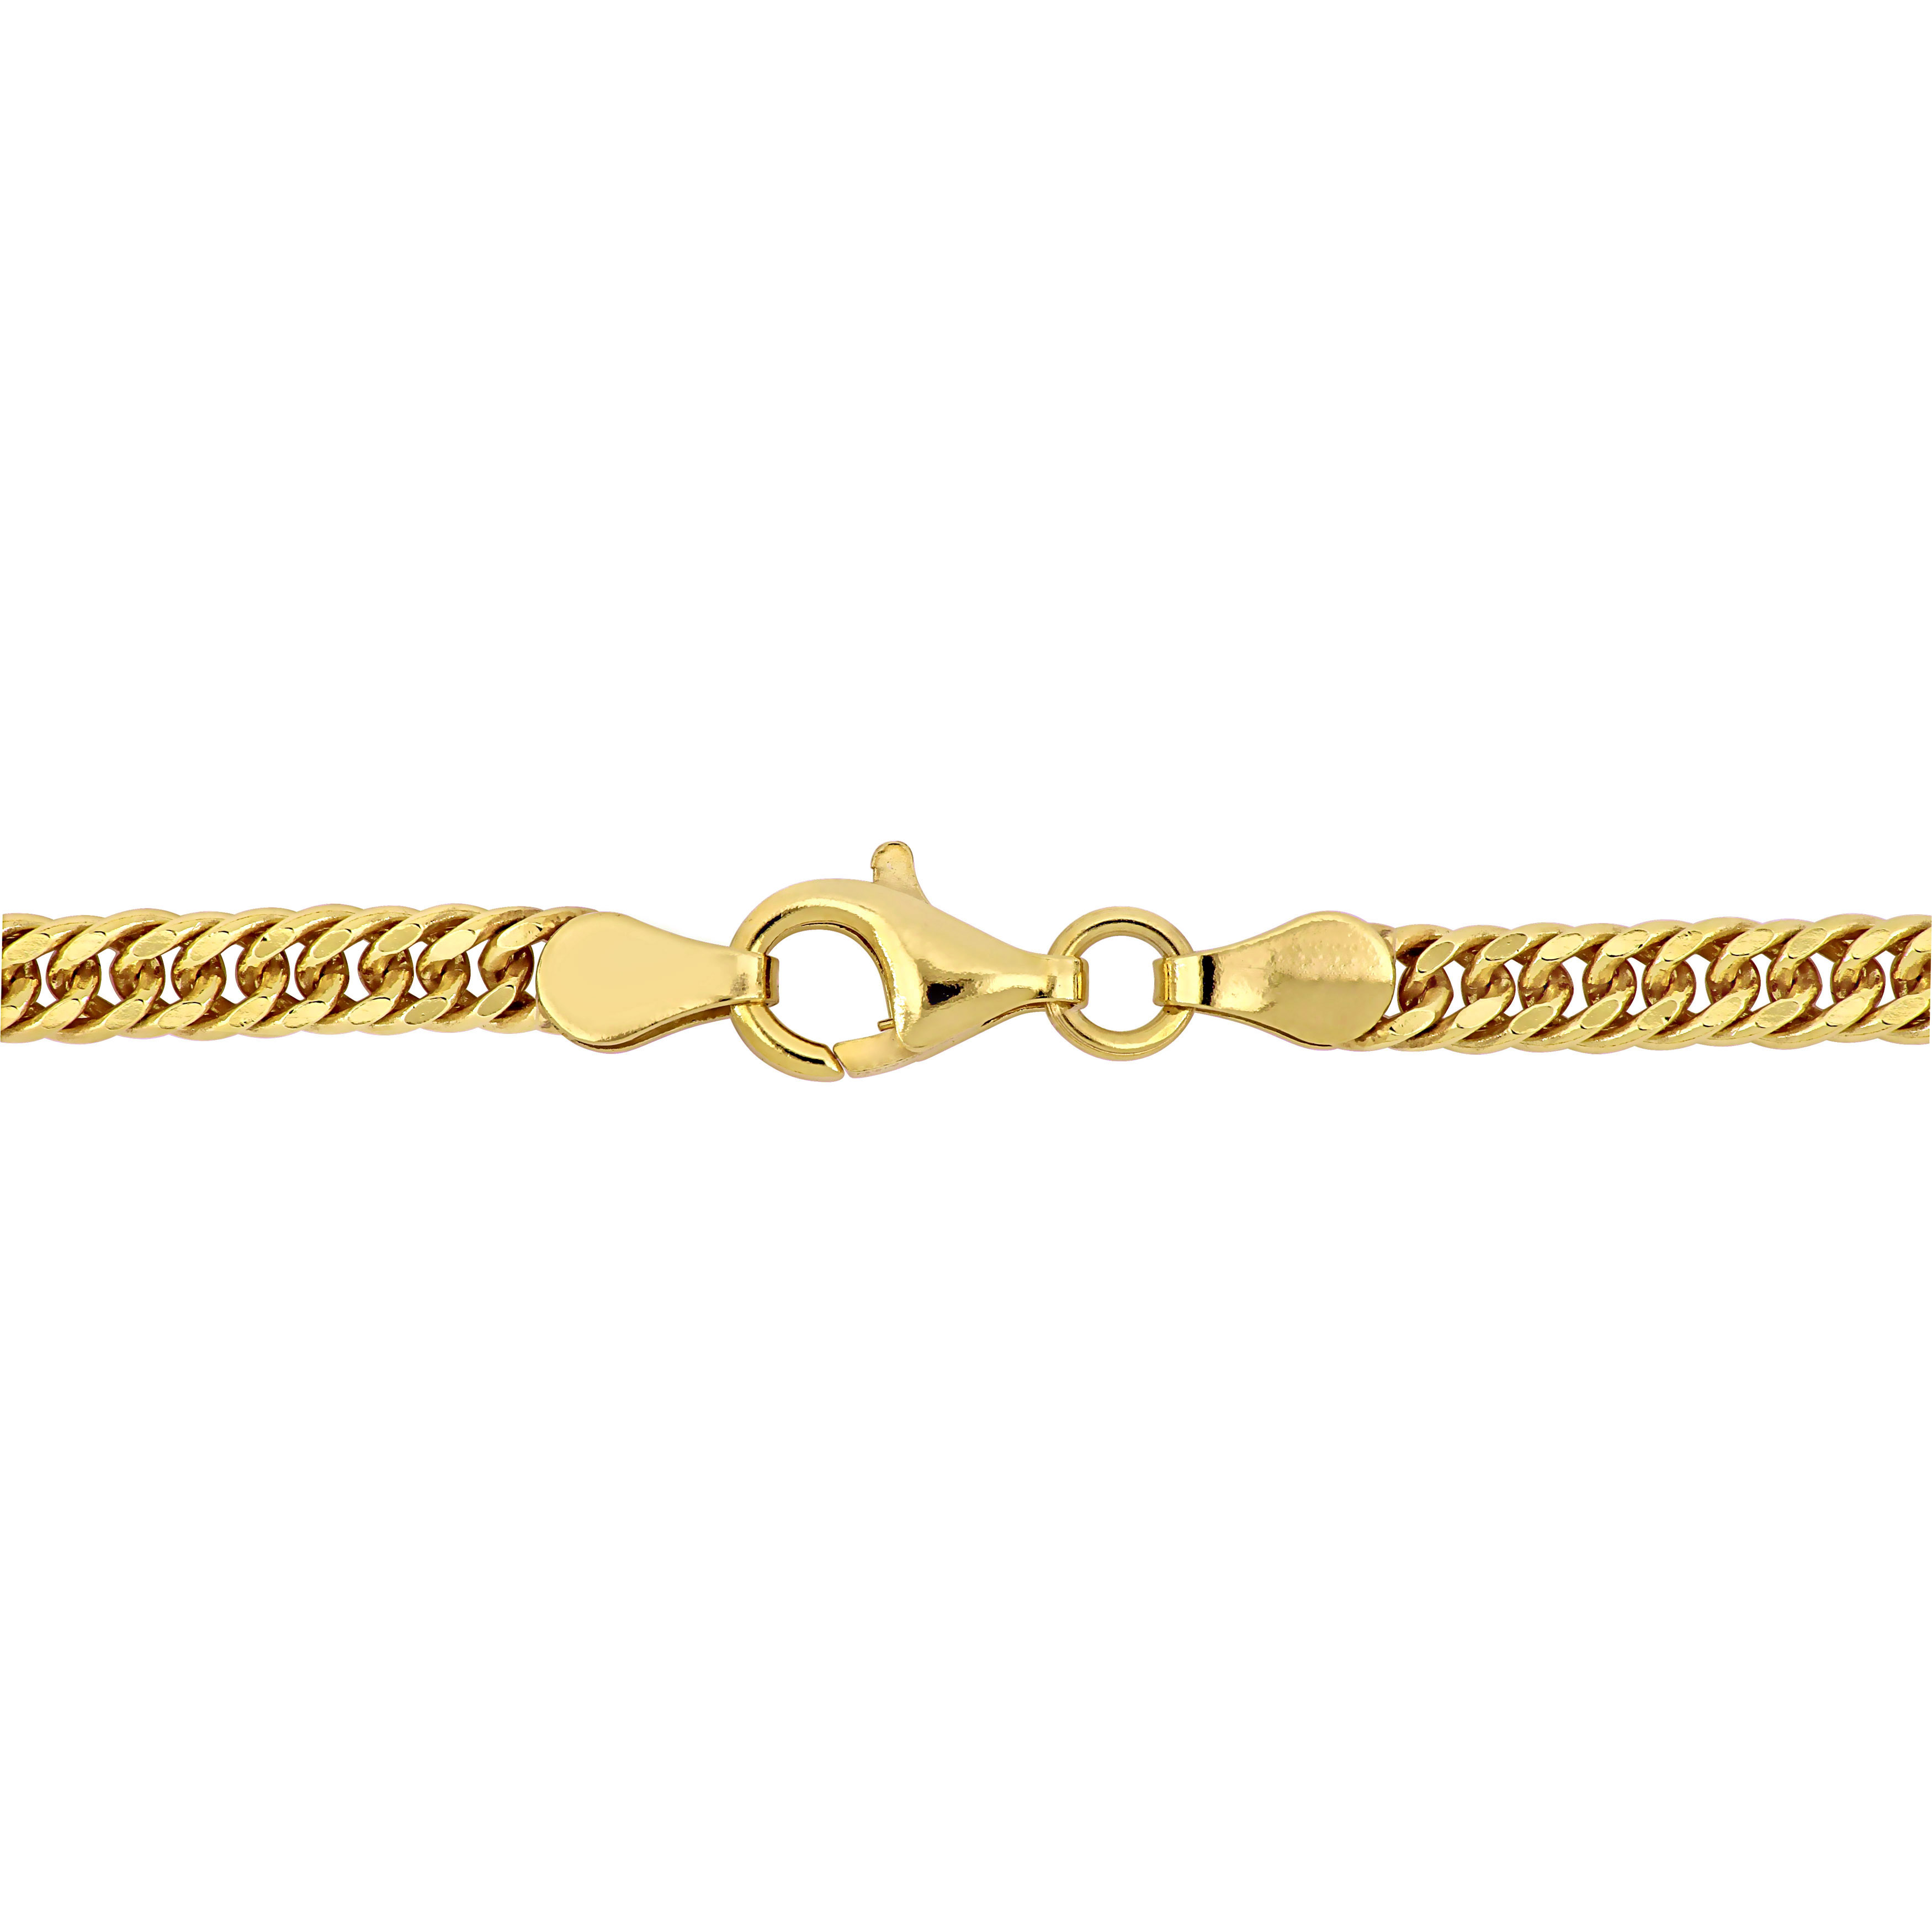 4mm Double Curb Link Chain Bracelet in Yellow Plated Sterling Silver - 7.5 in.